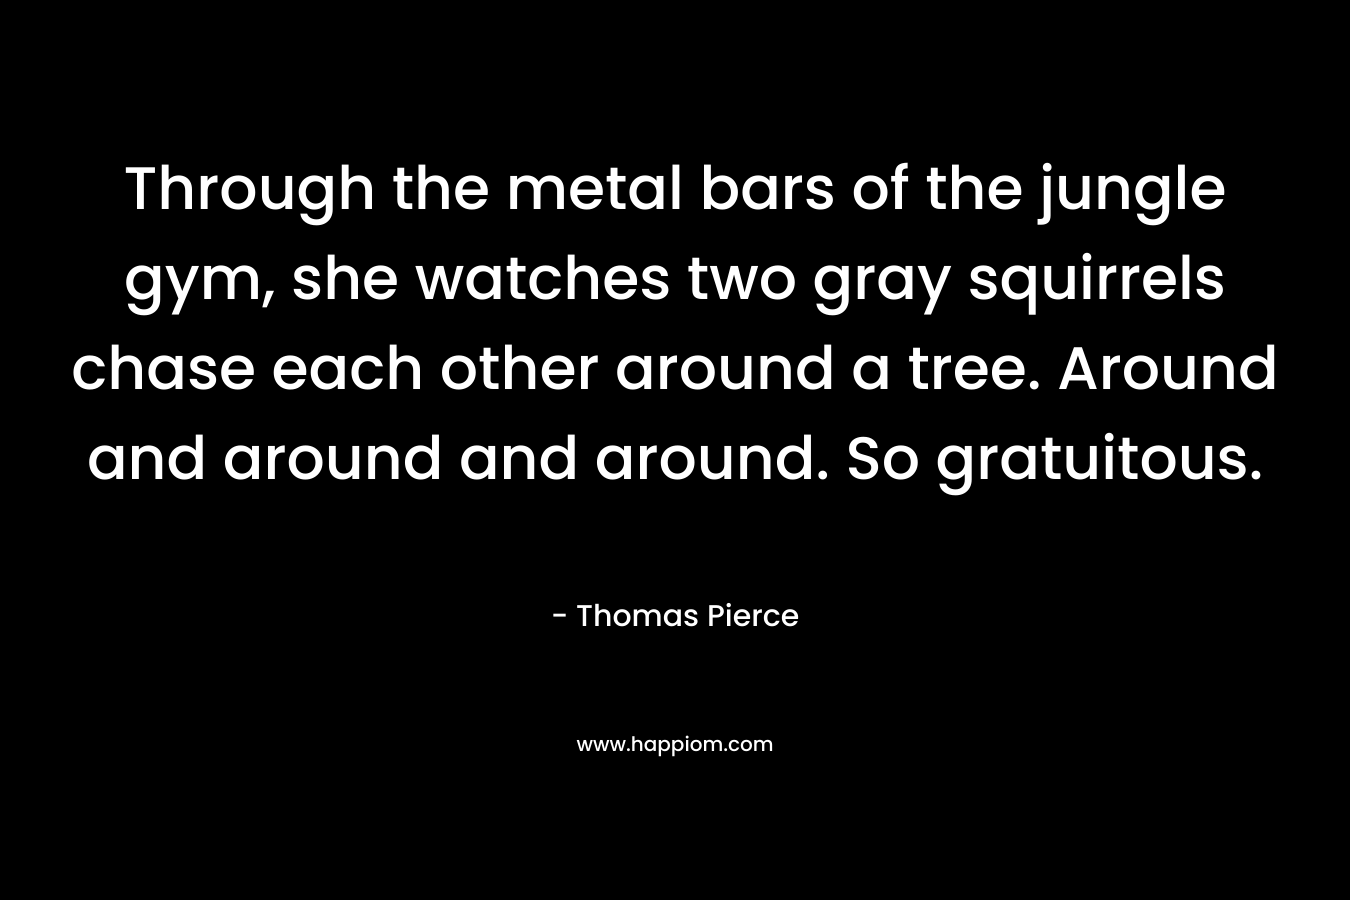 Through the metal bars of the jungle gym, she watches two gray squirrels chase each other around a tree. Around and around and around. So gratuitous. – Thomas Pierce